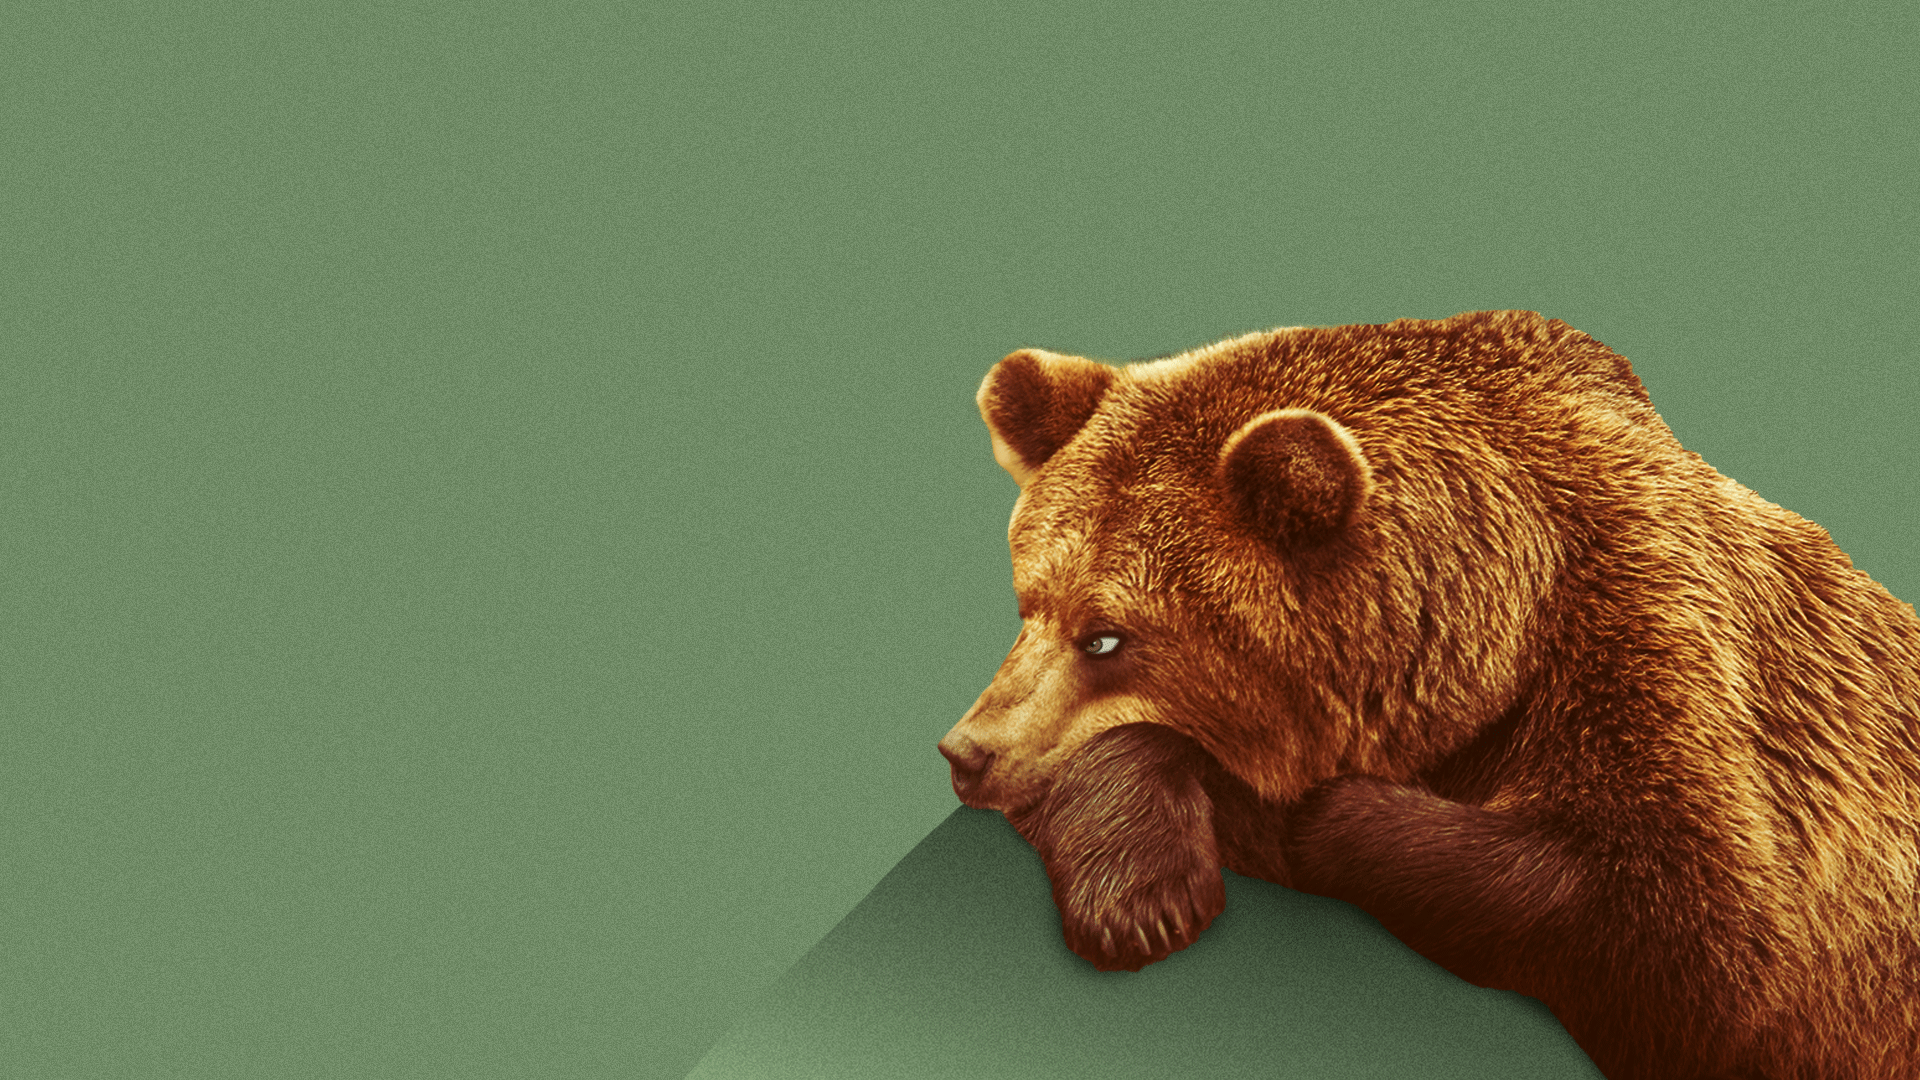 Illustration of a bored bear rolling its eyes.